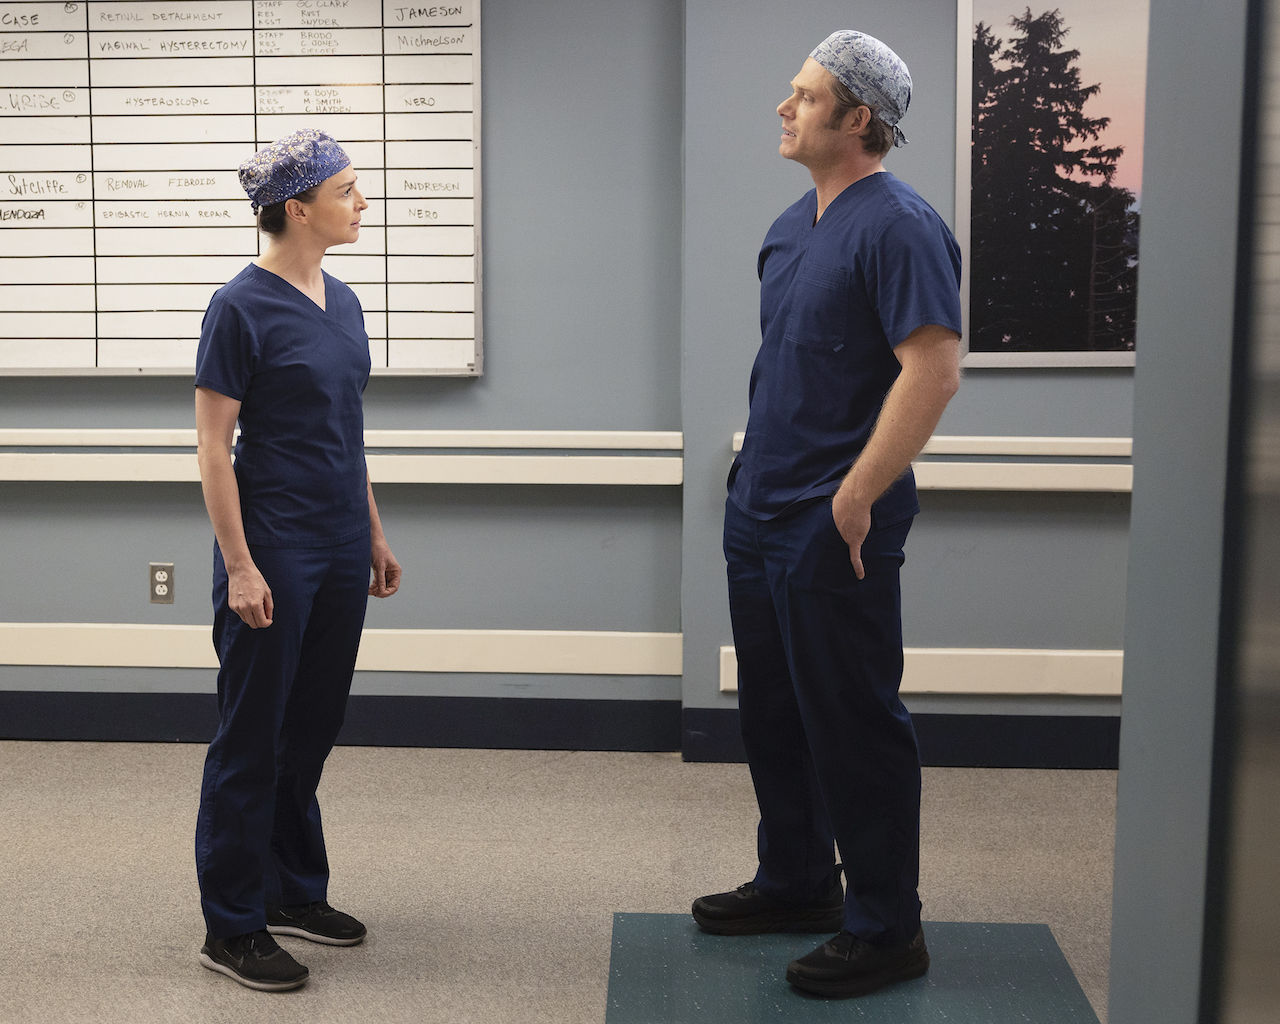 Caterina Scorsone as Amelia Shepherd and Chris Carmack as Atticus “Link” Lincoln talk in a hallway in the hospital in 'Grey's Anatomy'.